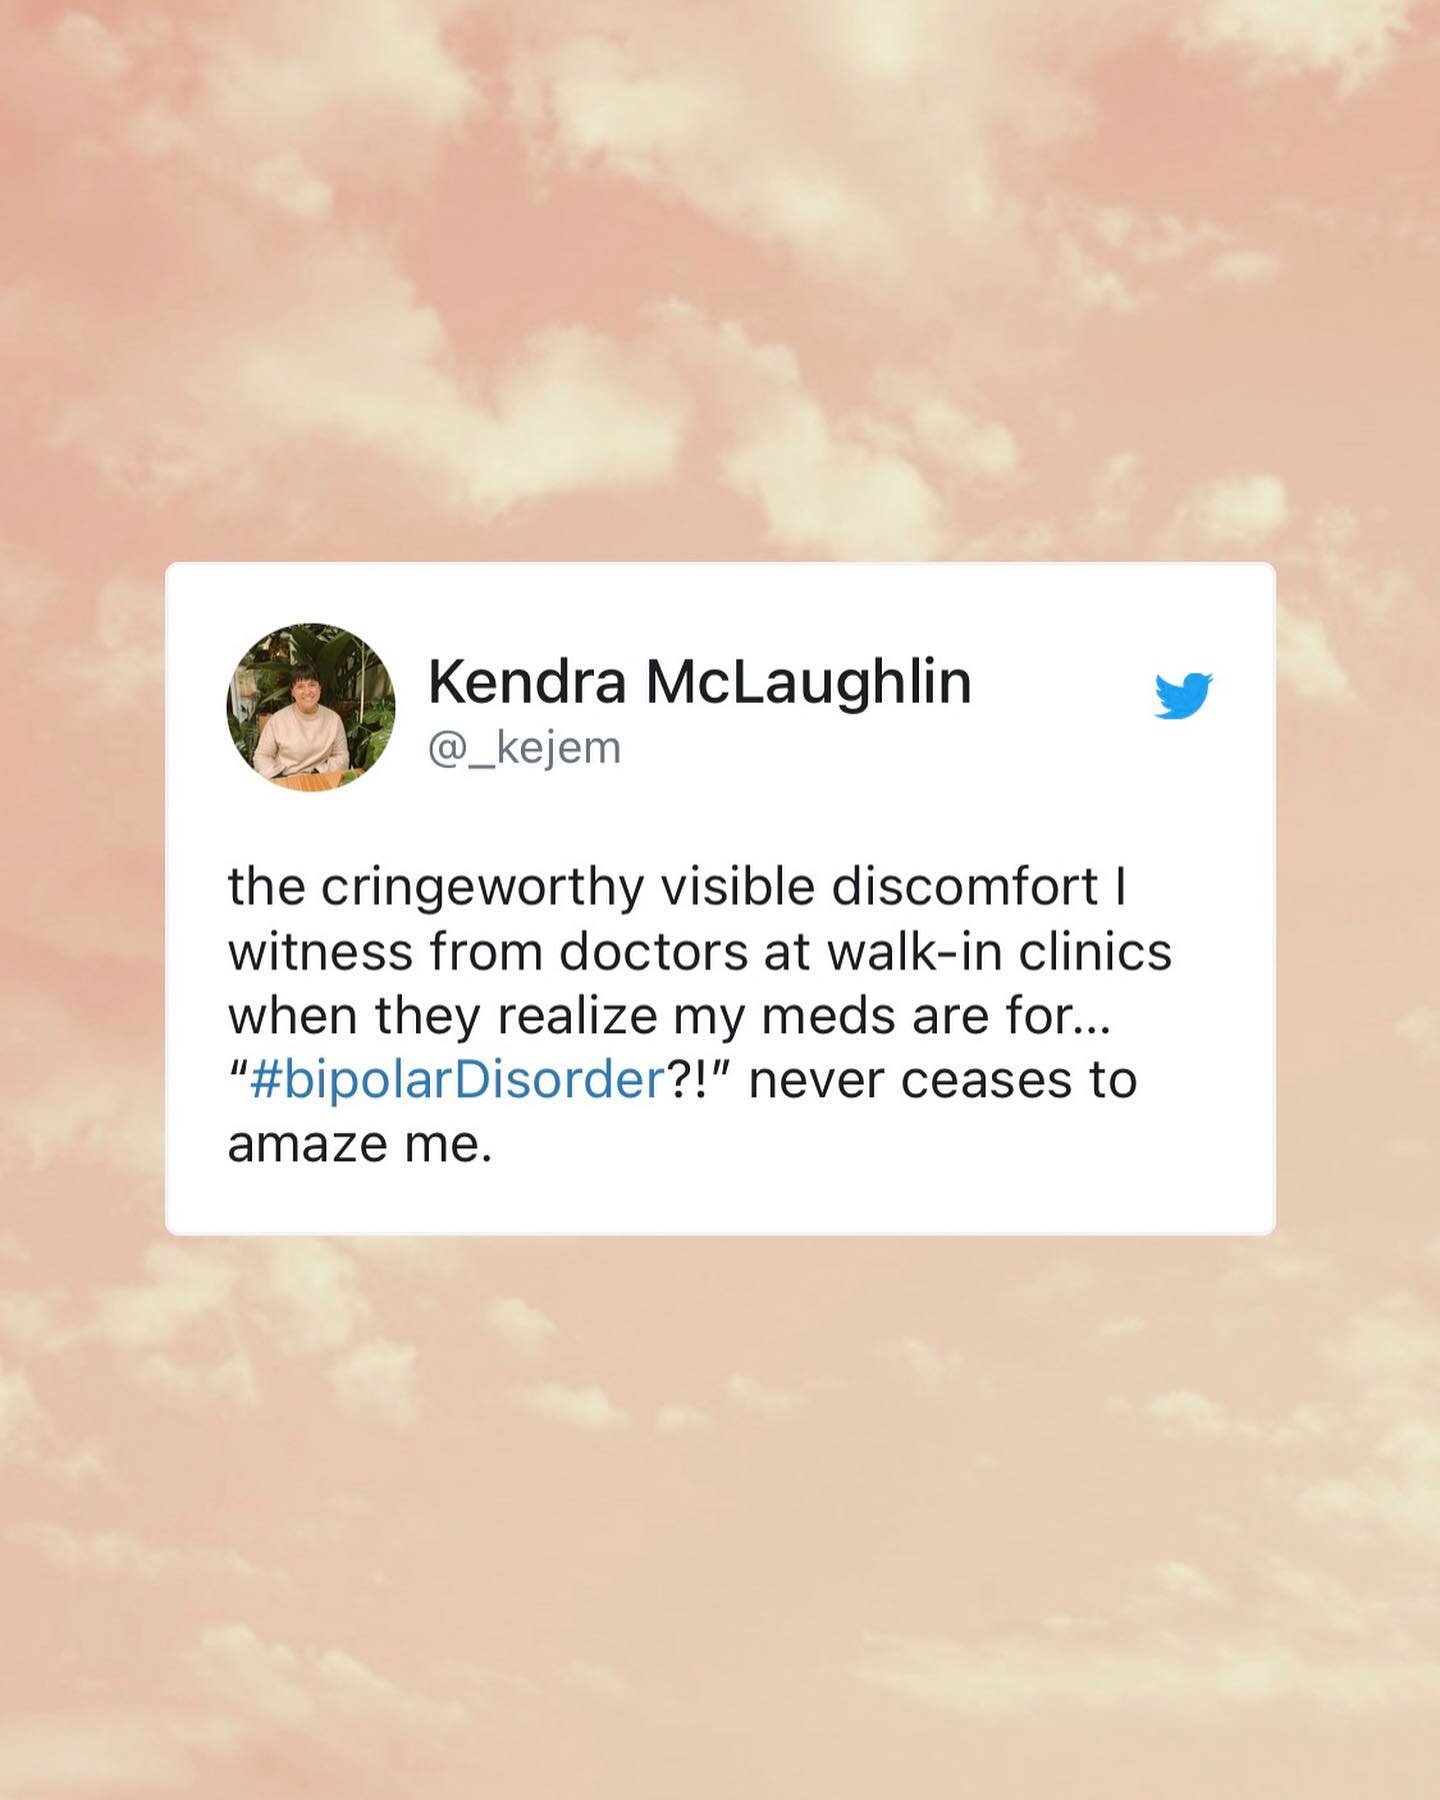 y&rsquo;all I&rsquo;m so frustrated by the sanism and lack of care in Canada&hellip;

[ID: Tweet by me reads: &ldquo;the cringeworthy visible discomfort I witness from doctors at walk-in clinics when they realize my meds are for&hellip; &ldquo;#bipol